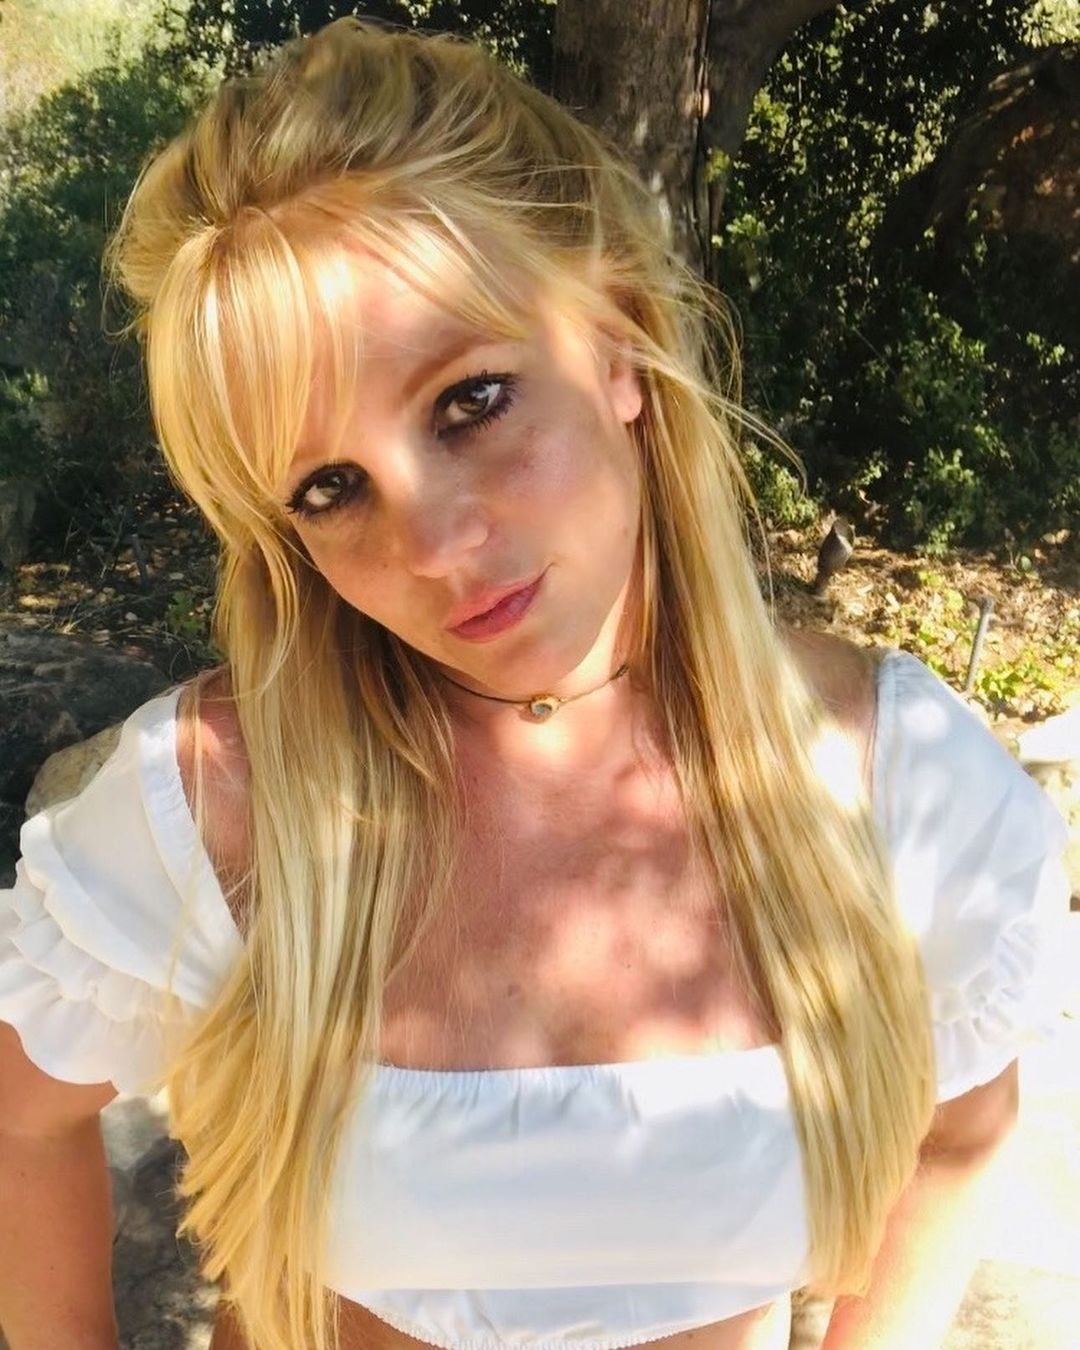 Britney Spears says she ‘cried for two weeks’ over documentary